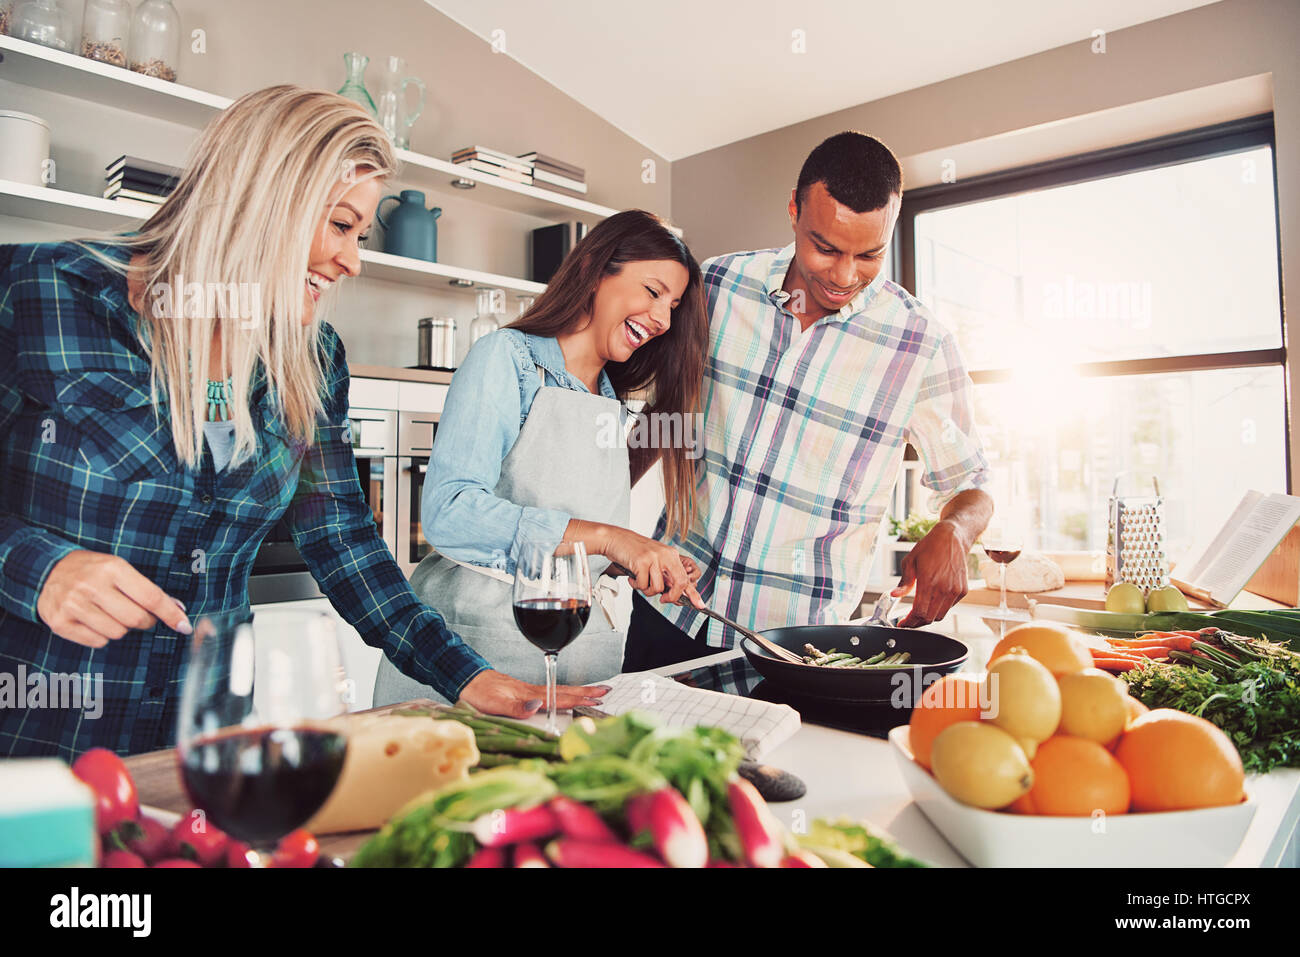 Portrait of three people at kitchen cooking and having fun Stock Photo